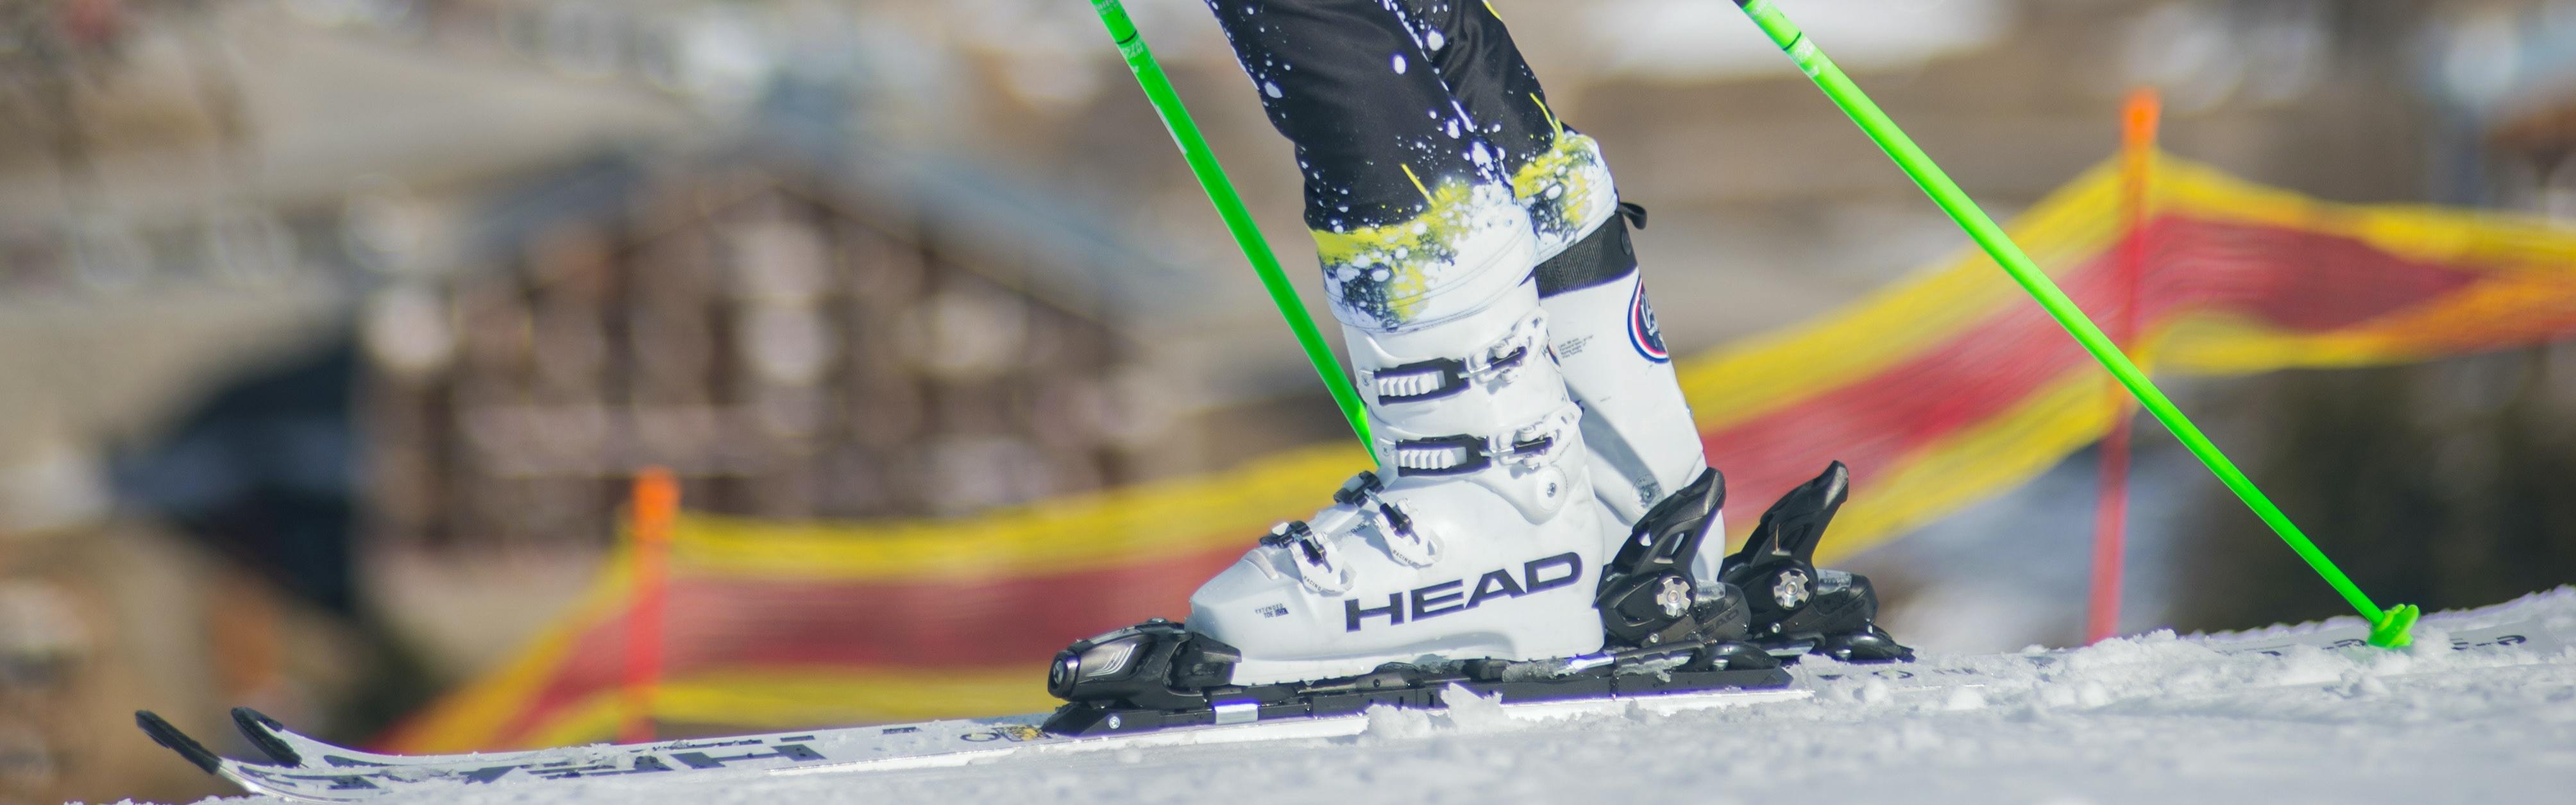 A pair of ski boots clipped into skis on the snow. 